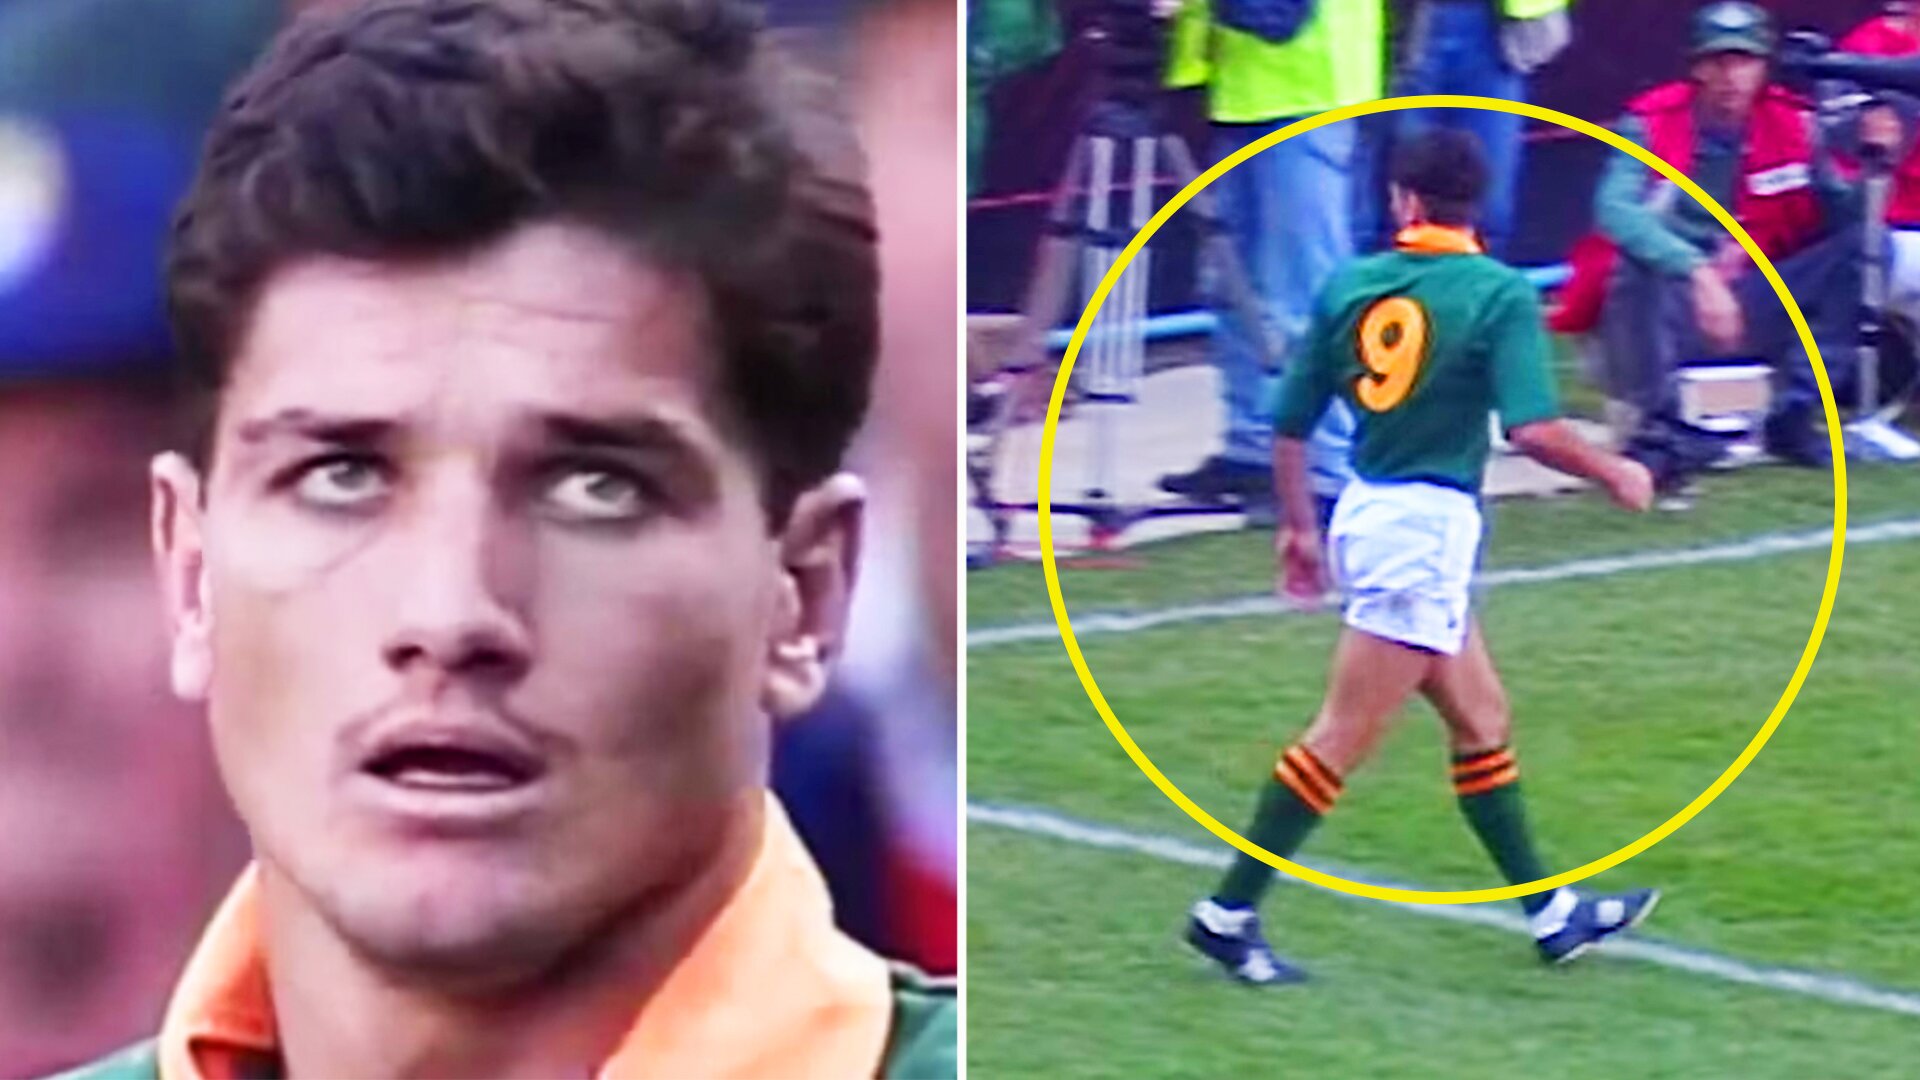 If you didn't know how good Joost van der Westhuizen really was - watch this